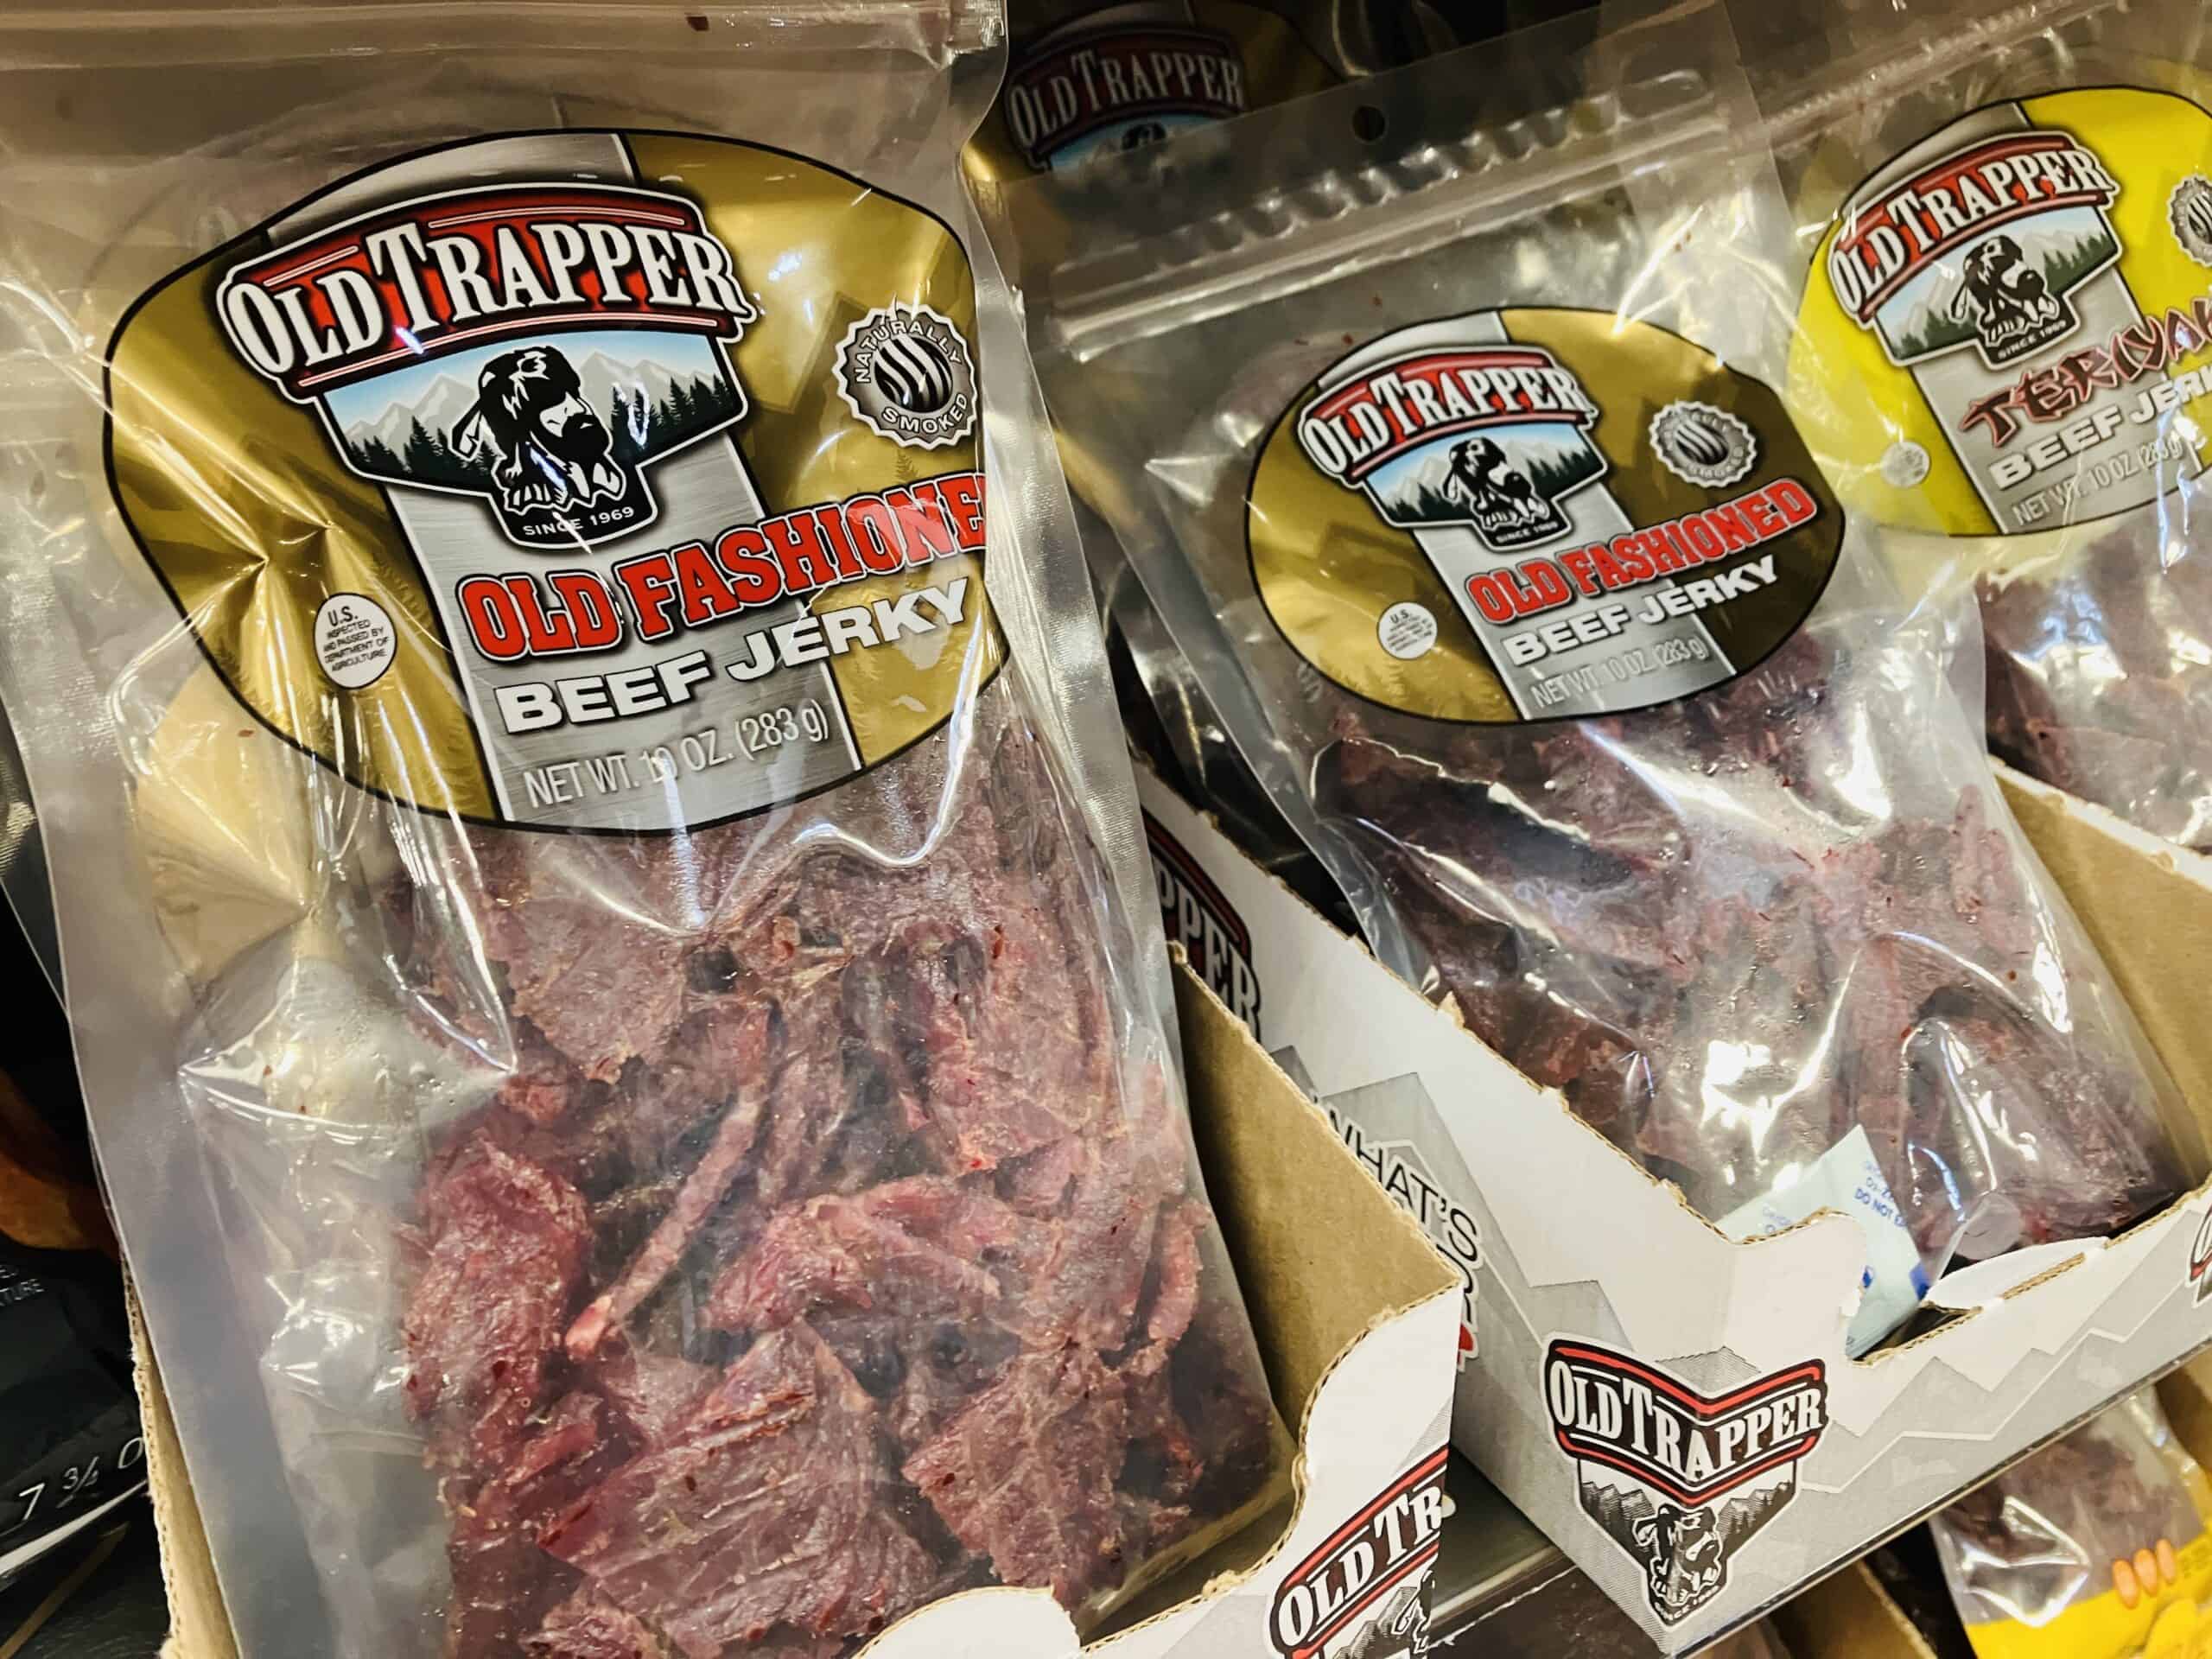 Old Trapper beef jerky